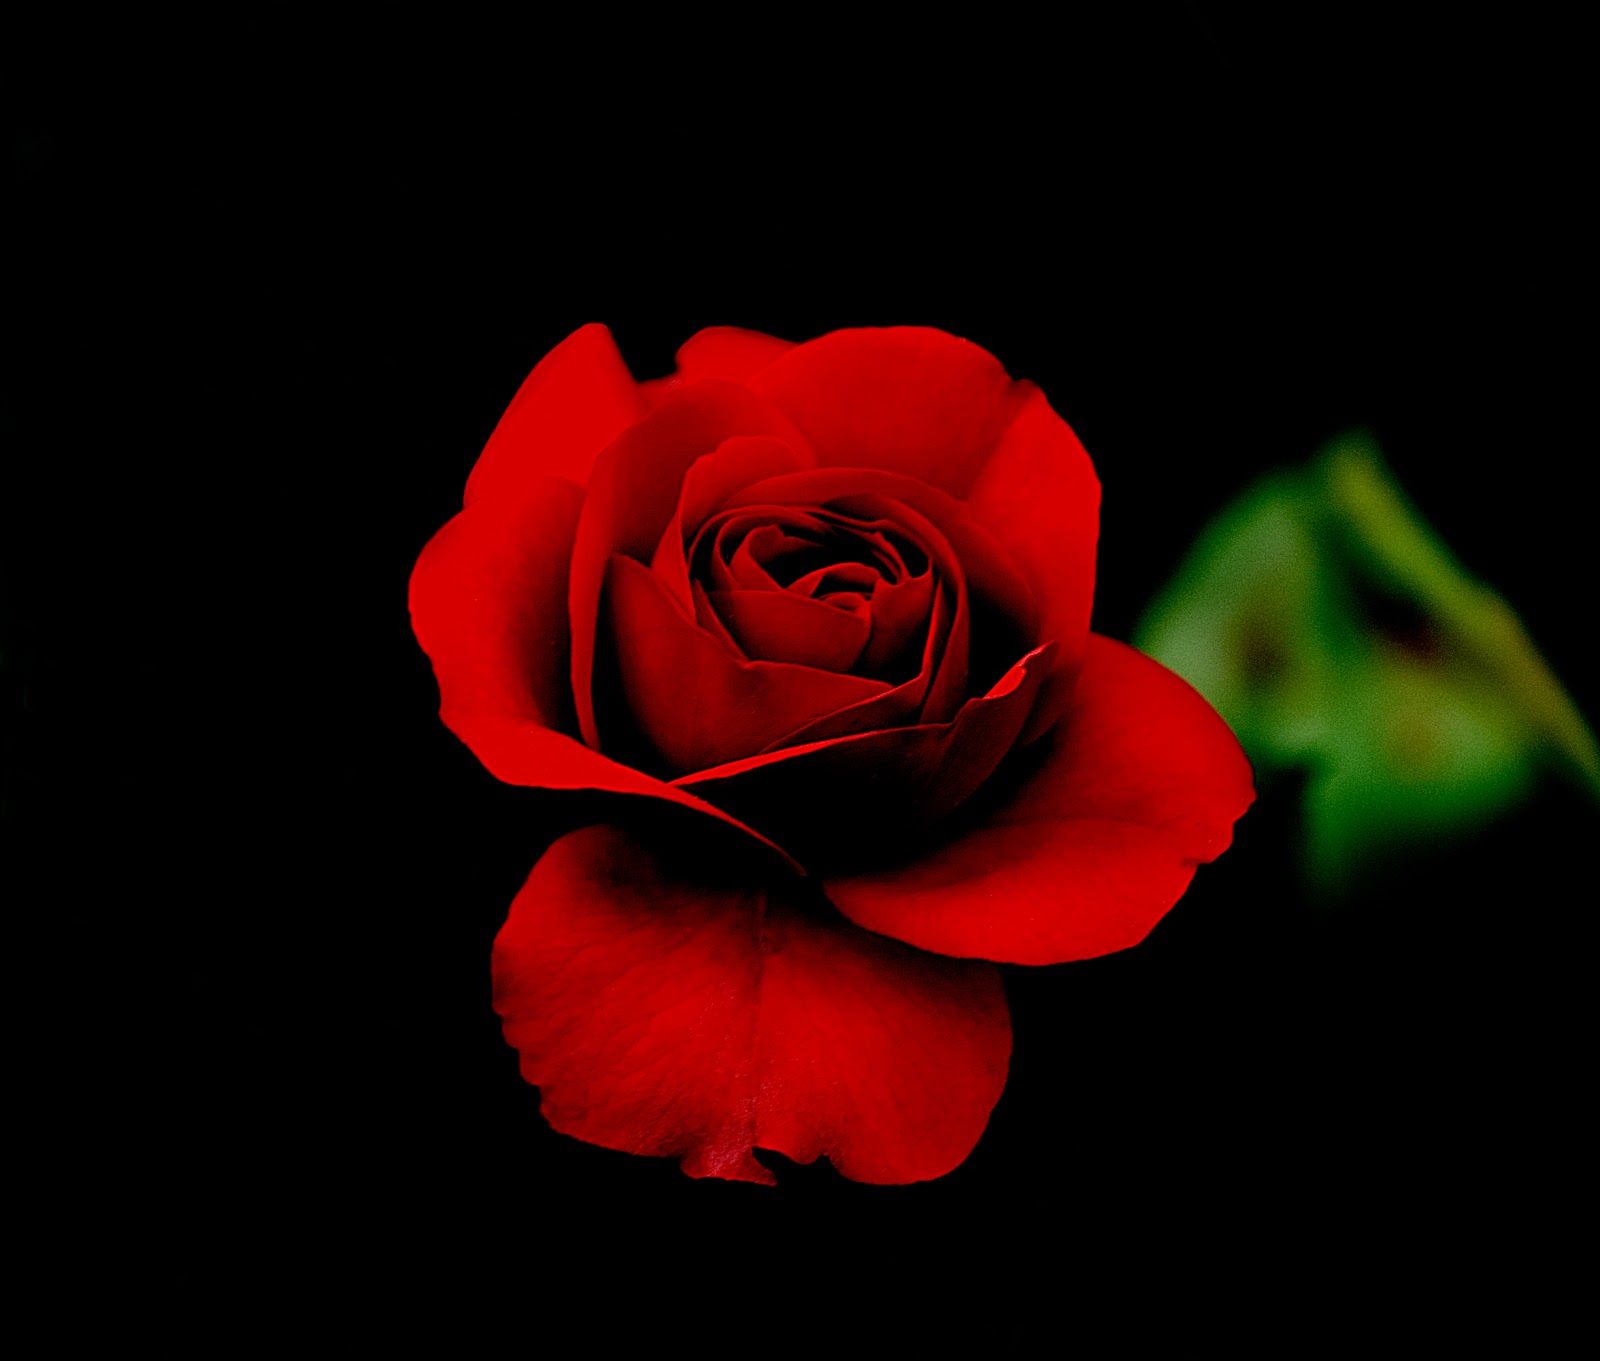 Free Download Red Rose With Black Background 1600x1361 For Your Desktop Mobile Tablet Explore 69 Red Roses On Black Background Black Roses Wallpaper Black And White Rose Wallpaper Red